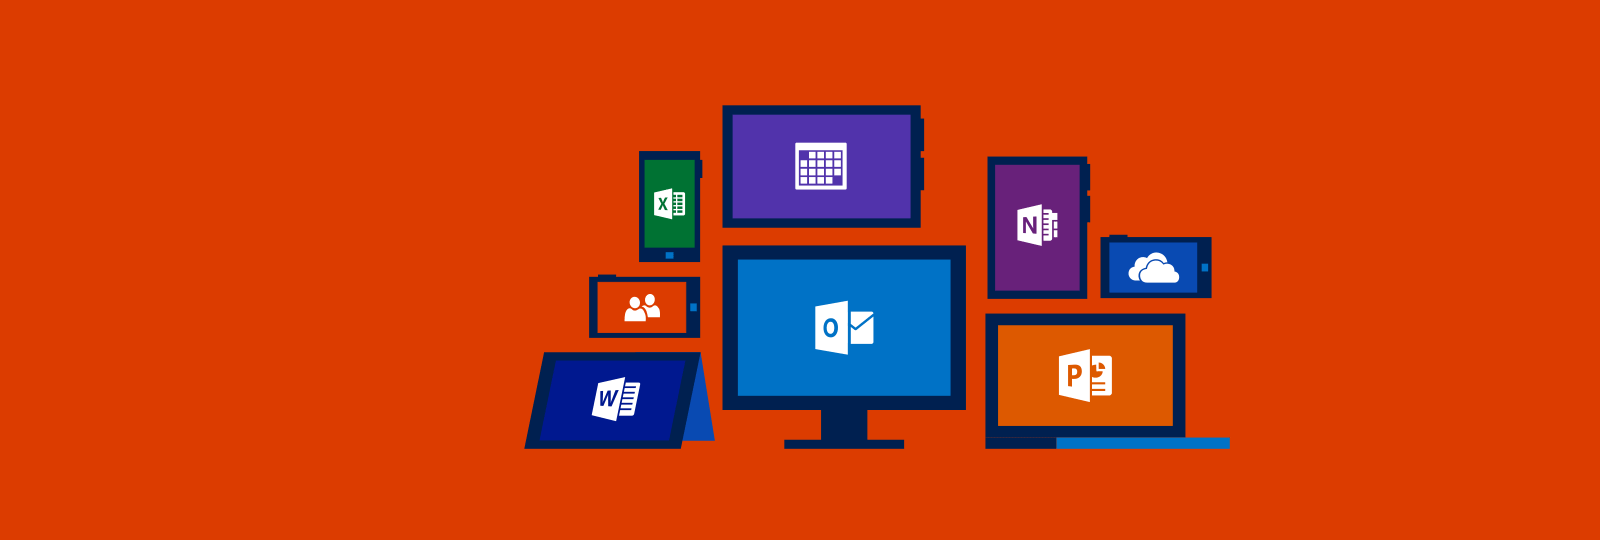 Tutorials - Activate Microsoft Office 2016 Without Any Software And Product  Key | Cybersociety